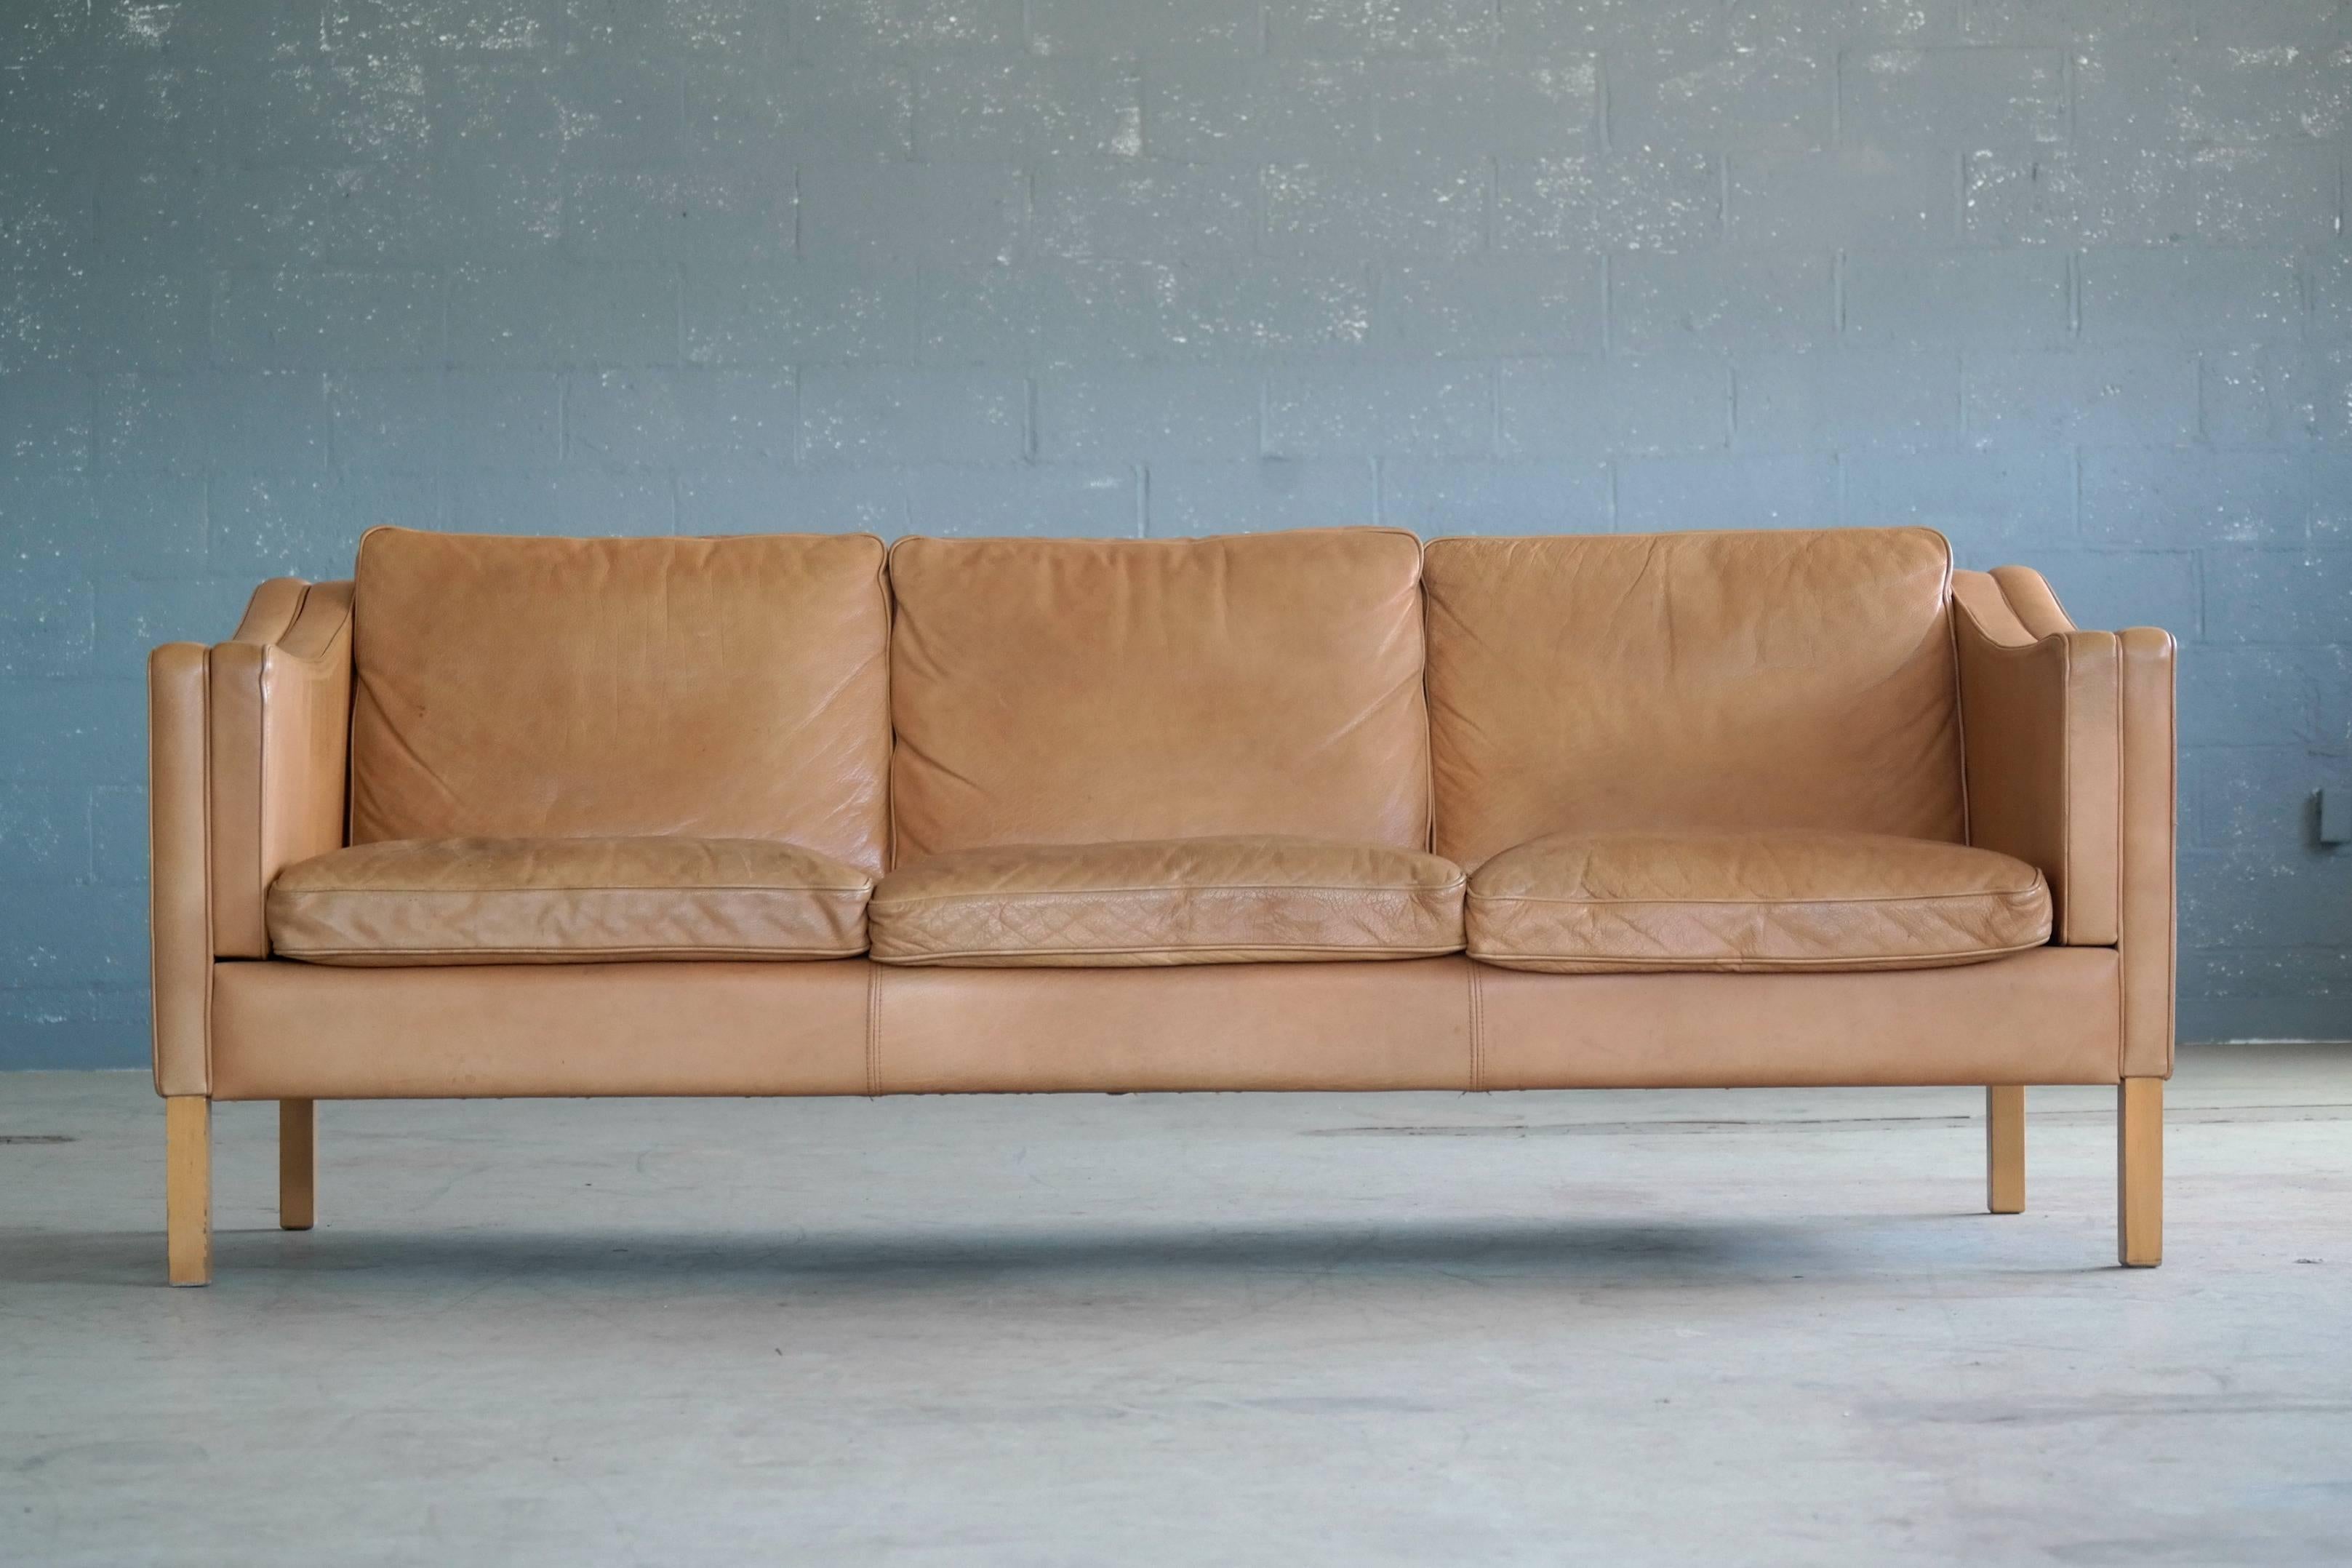 Classic Børge Mogensen model 2213 style sofa in tan leather by Stouby Mobler, circa 1970. Highest quality craftsmanship upholstered in aniline leather. Some sun fading of the color and just the right amount of patina and wear, scuffs and scratches